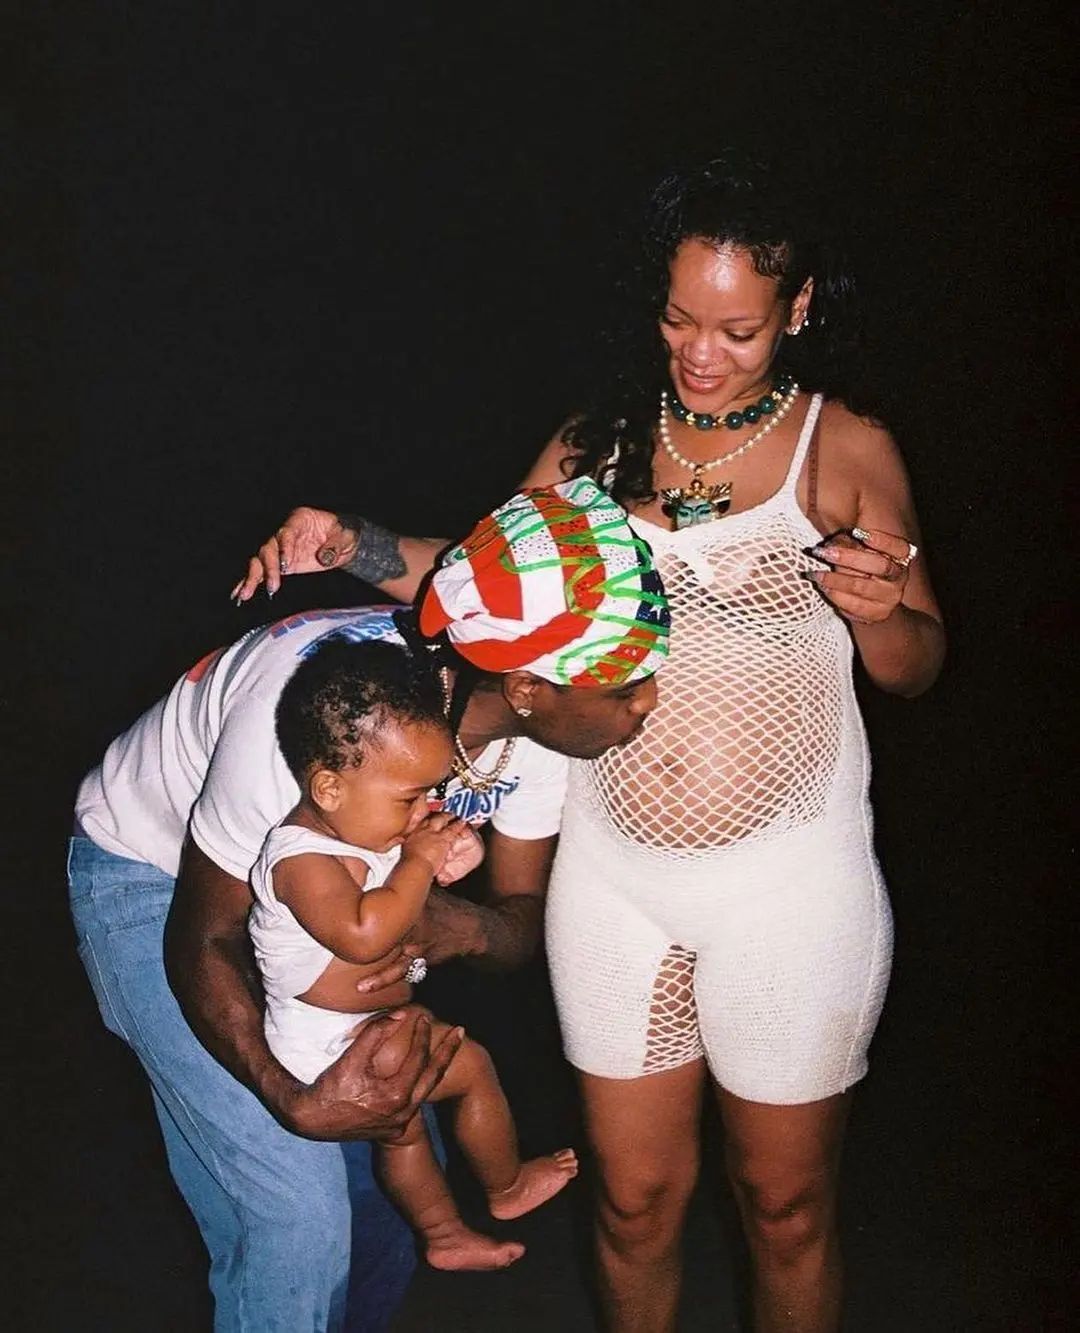 Rihanna and A$AP Rocky already have two young children